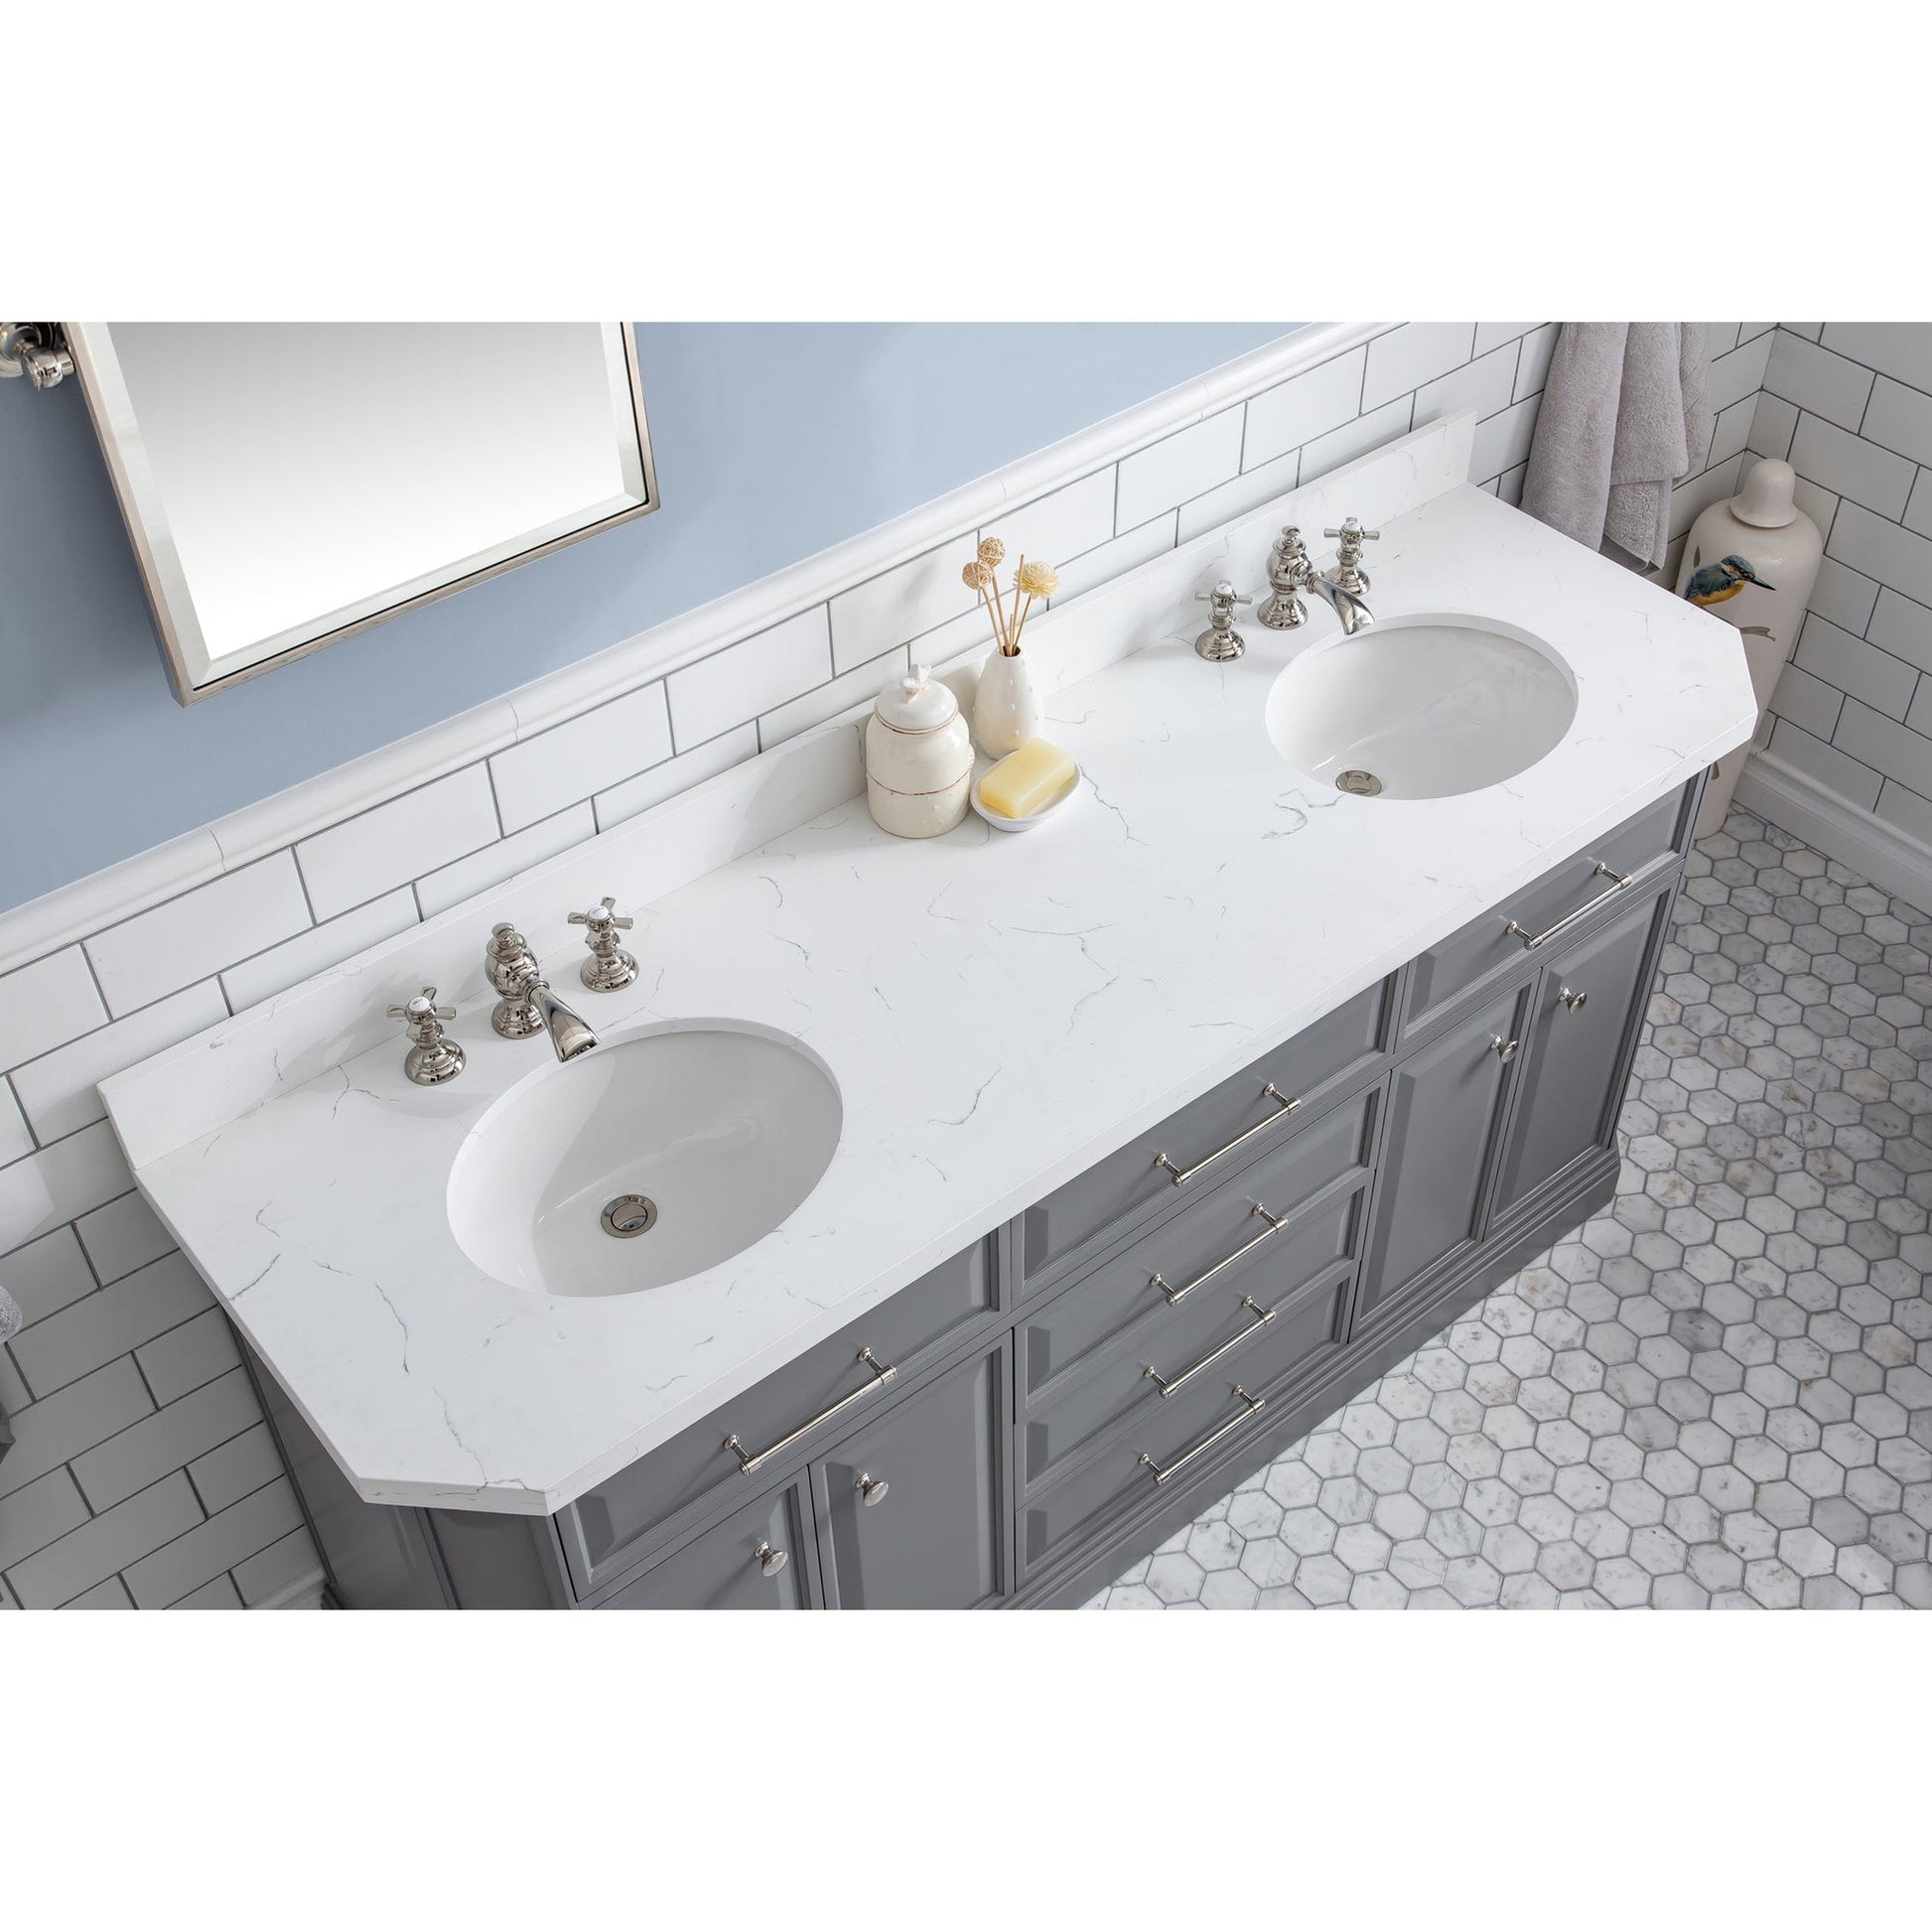 Water Creation Palace 72" Quartz Carrara Cashmere Grey Bathroom Vanity Set With Hardware And F2-0013 Faucets, Mirror in Polished Nickel (PVD) Finish